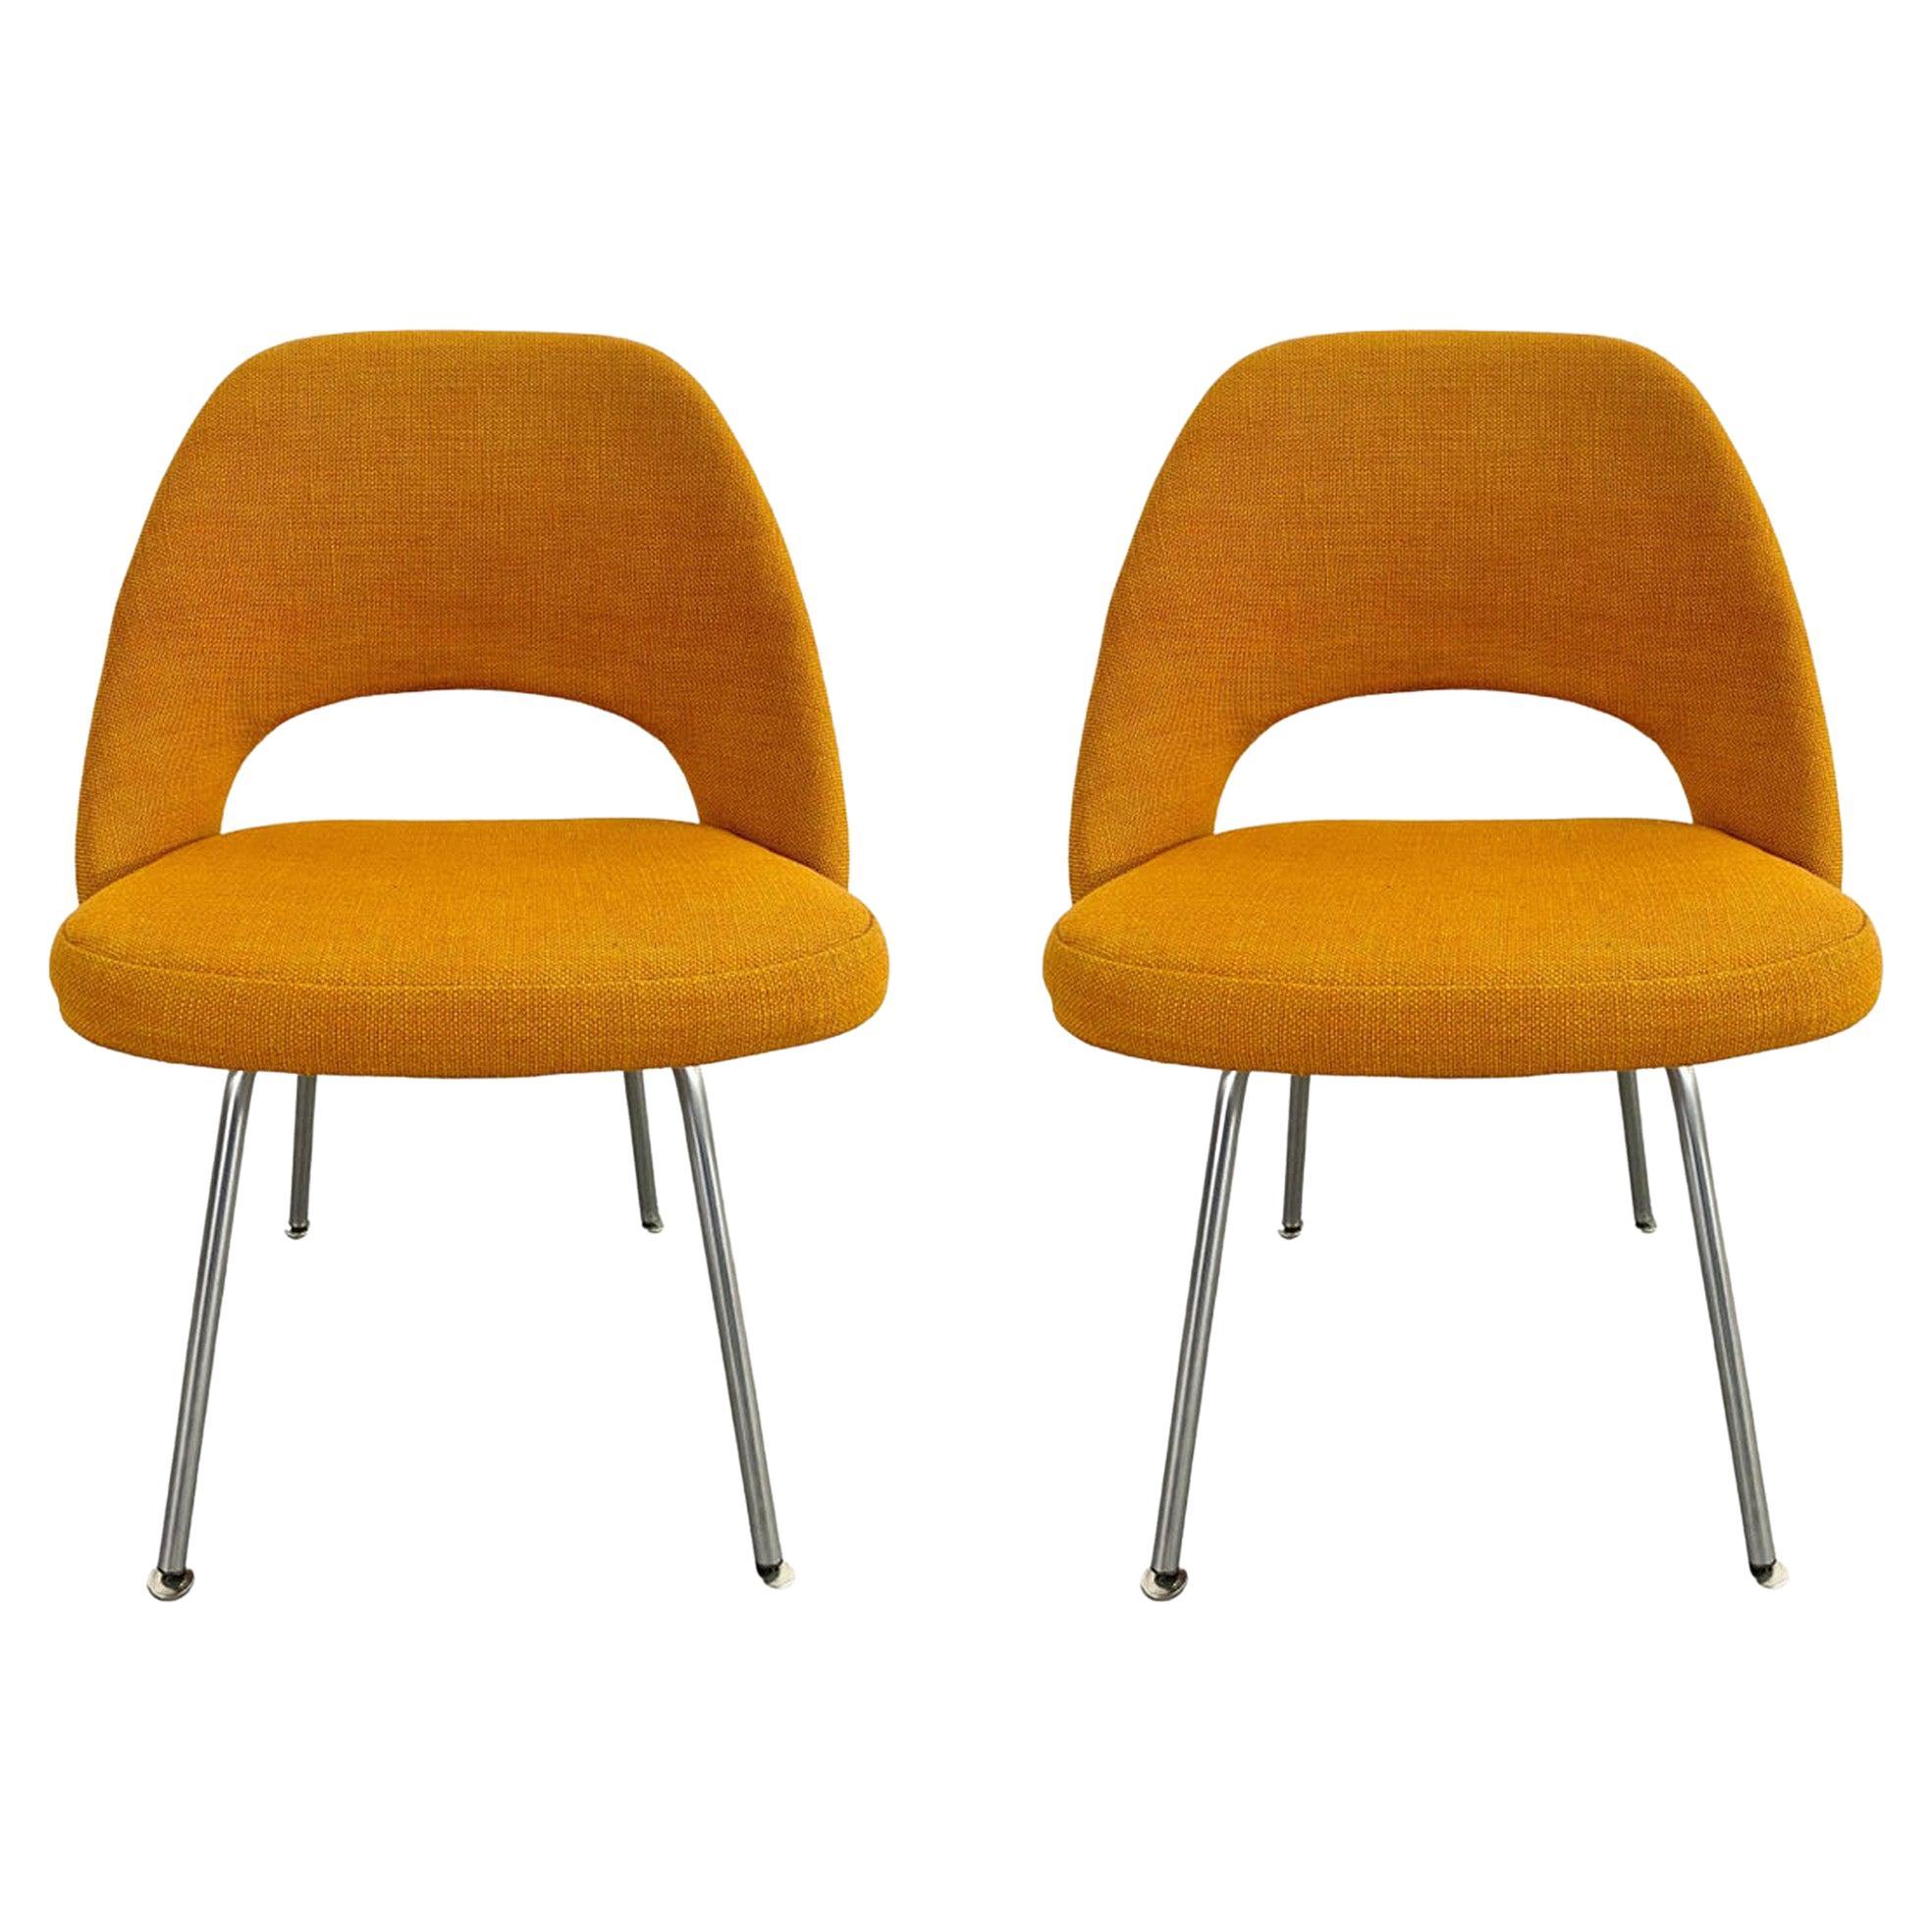 Eero Saarinen for Knoll Side Chair, a Pair For Sale at 1stDibs